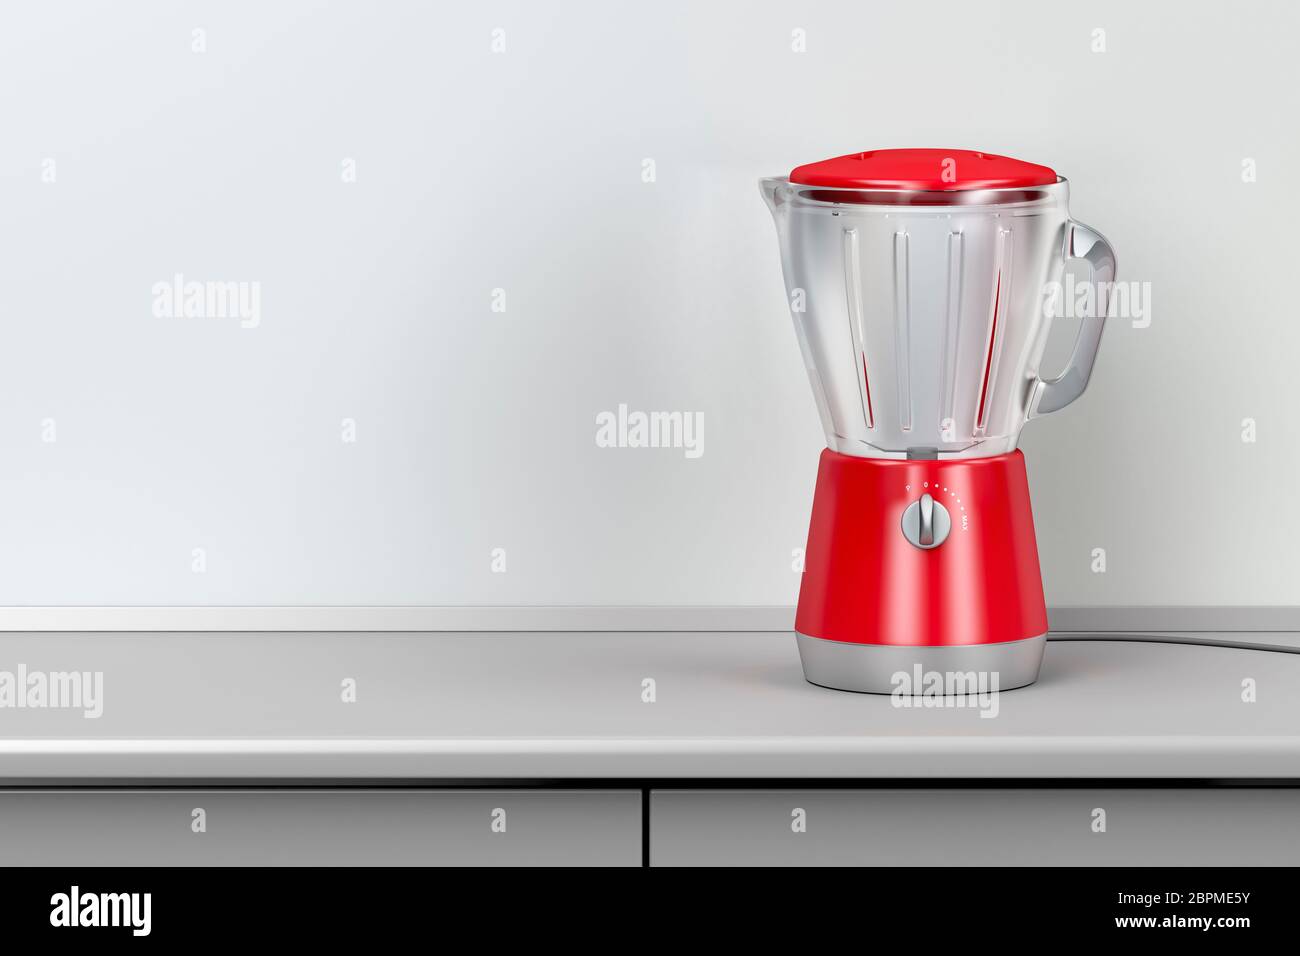 Red electric blender in the kitchen Stock Photo